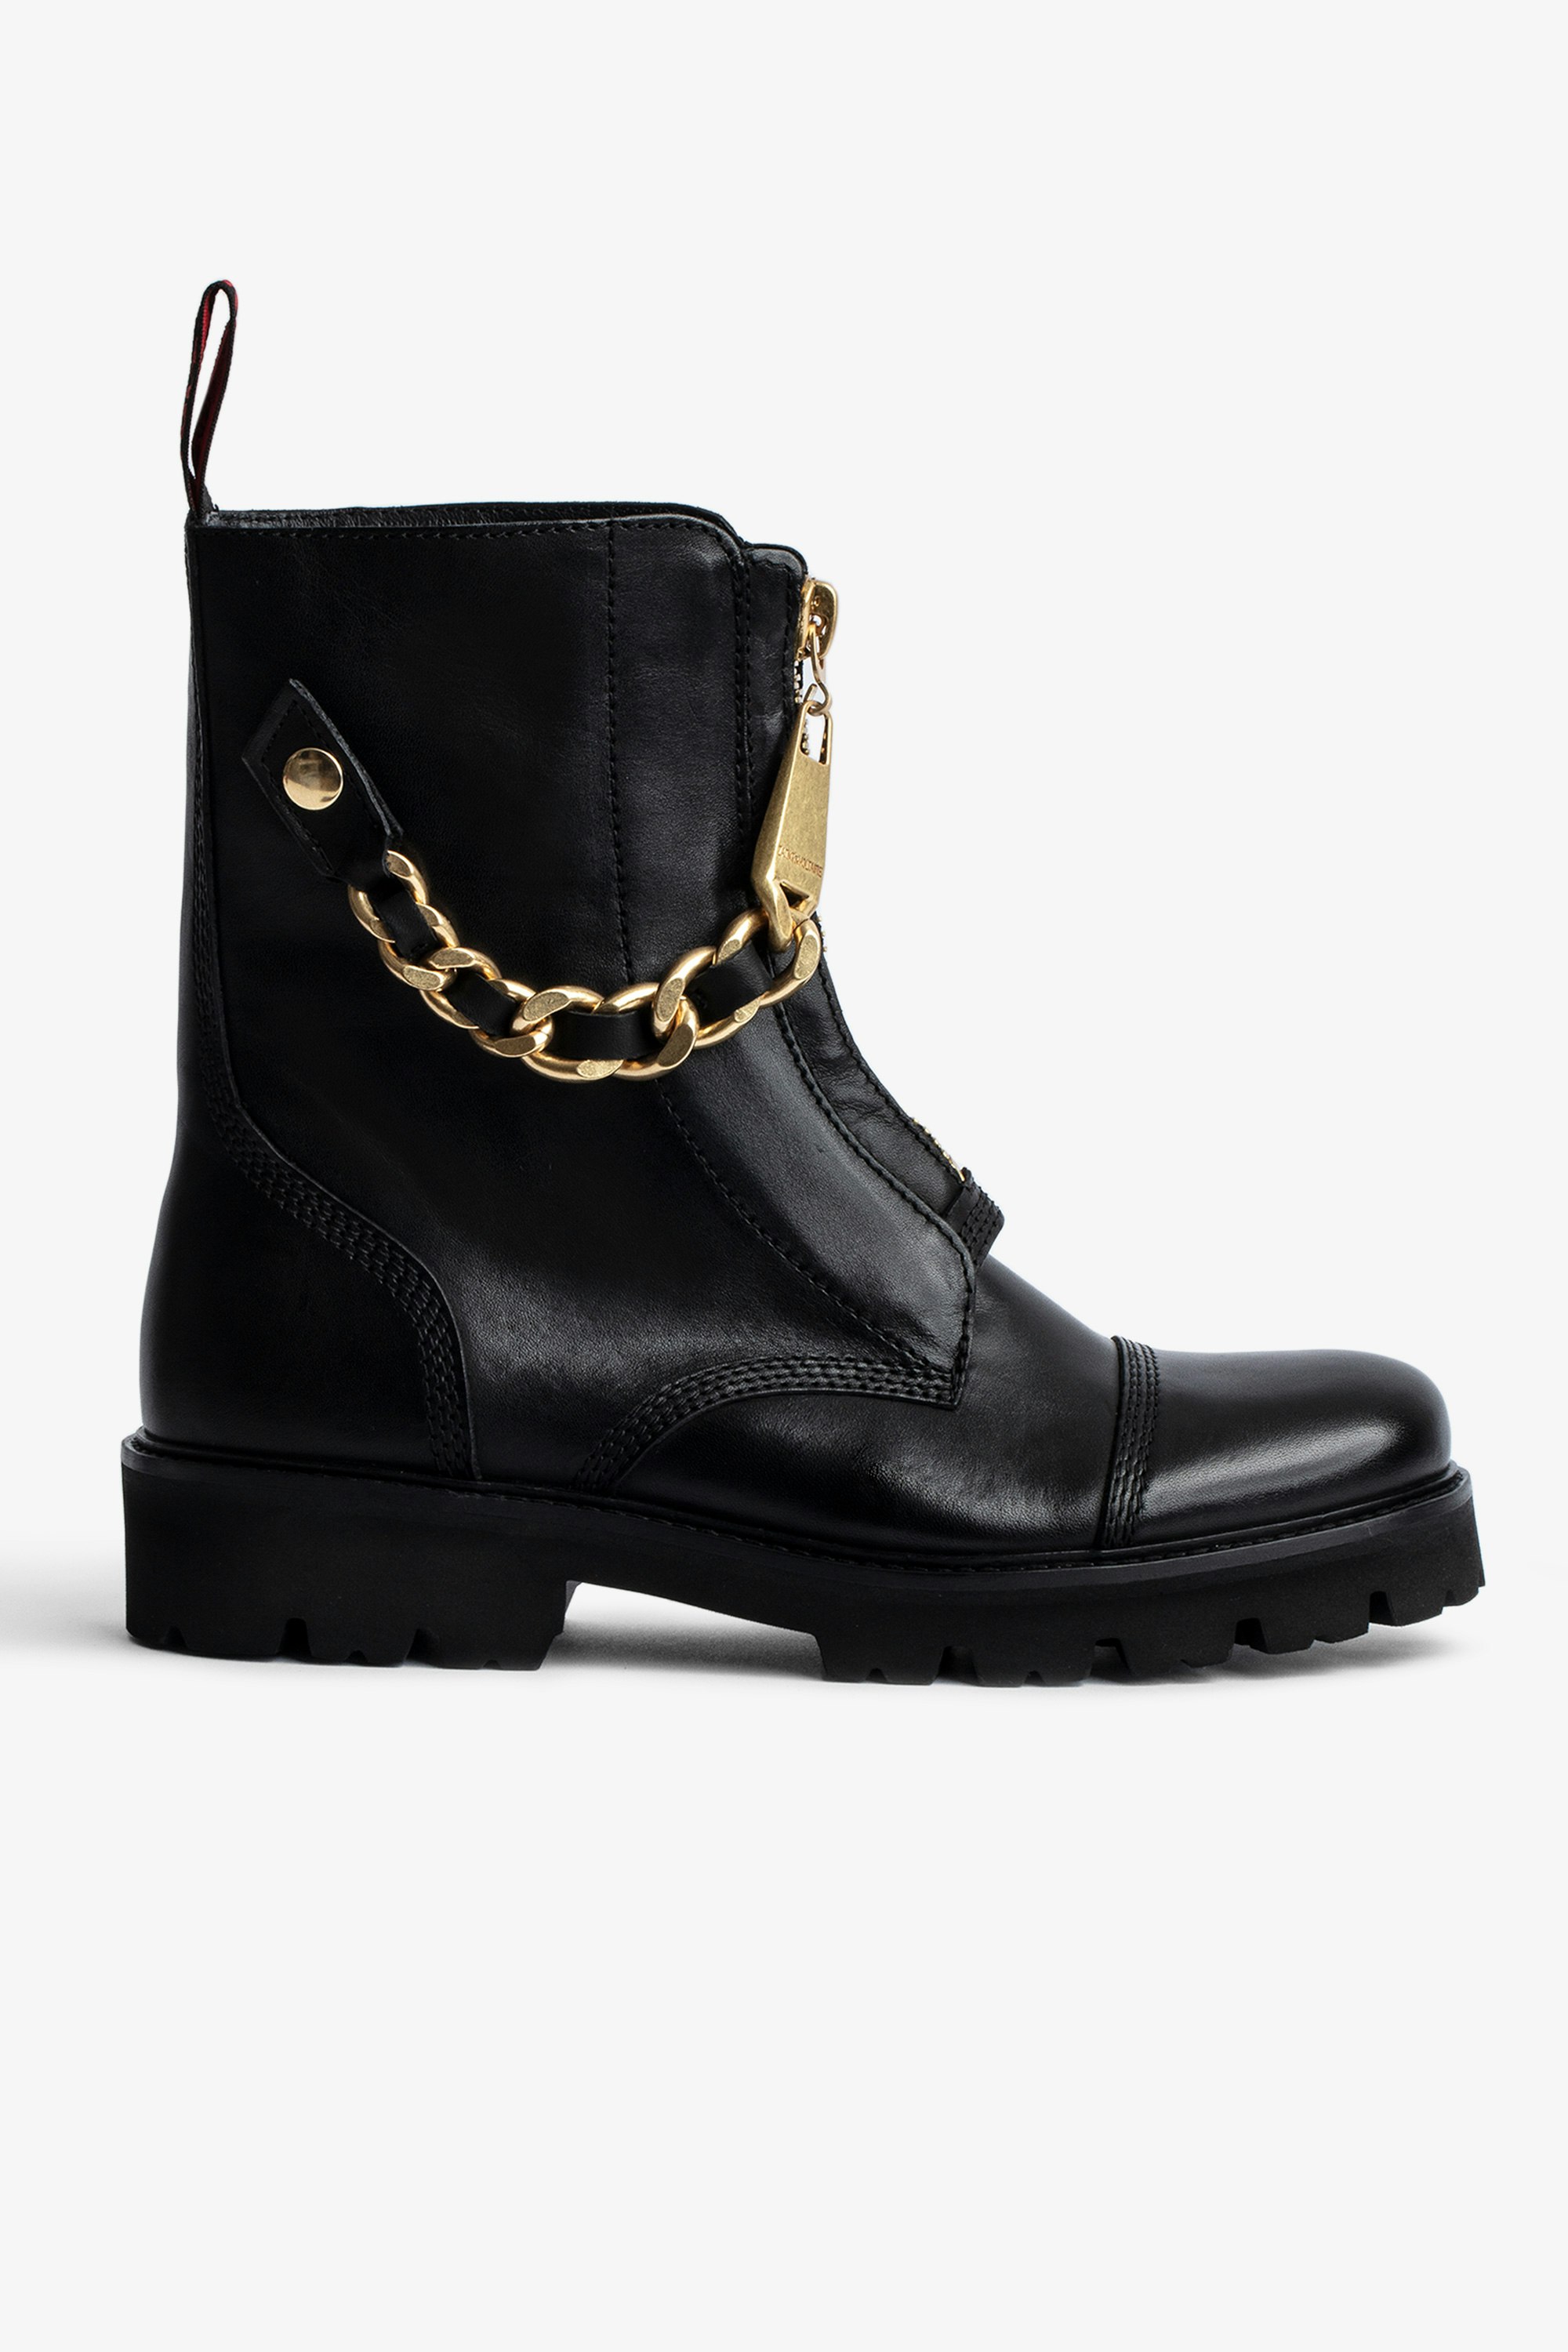 Joe アンクルブーツ Women’s black smooth leather mid-calf boots with an interwoven gold-tone and leather chain